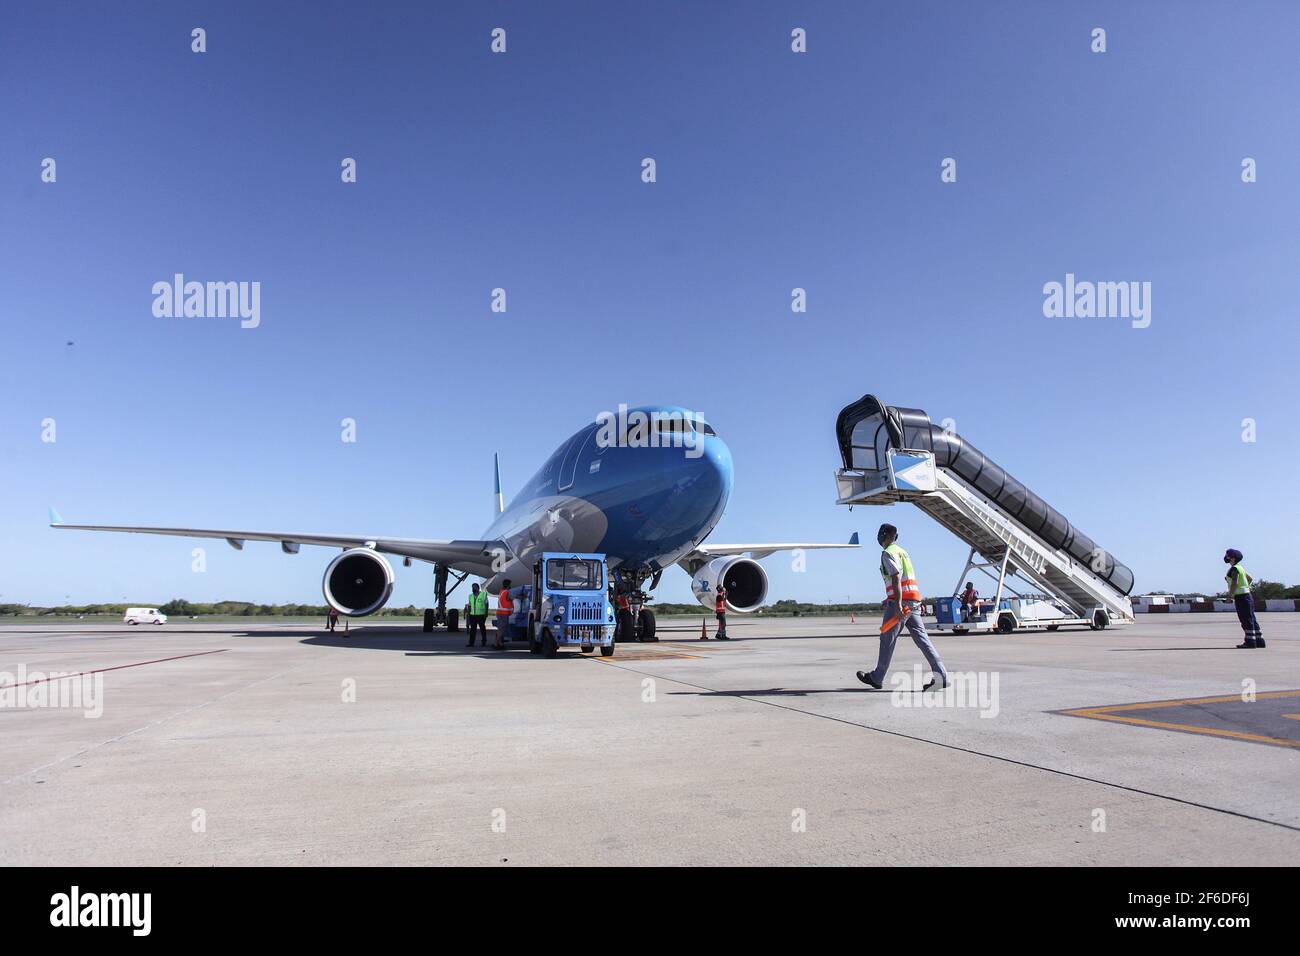 Buenos Aires, Argentina. 30th Mar, 2021. Flight number 1067 of Aerolineas Argentinas seen at Ezeiza Airport. The tenth flight of Aerolineas Argentinas sent to Russia to bring 300,000 doses of Sputnik V vaccines against the coronavirus arrived today, at the Ezeiza International Airport. Credit: SOPA Images Limited/Alamy Live News Stock Photo